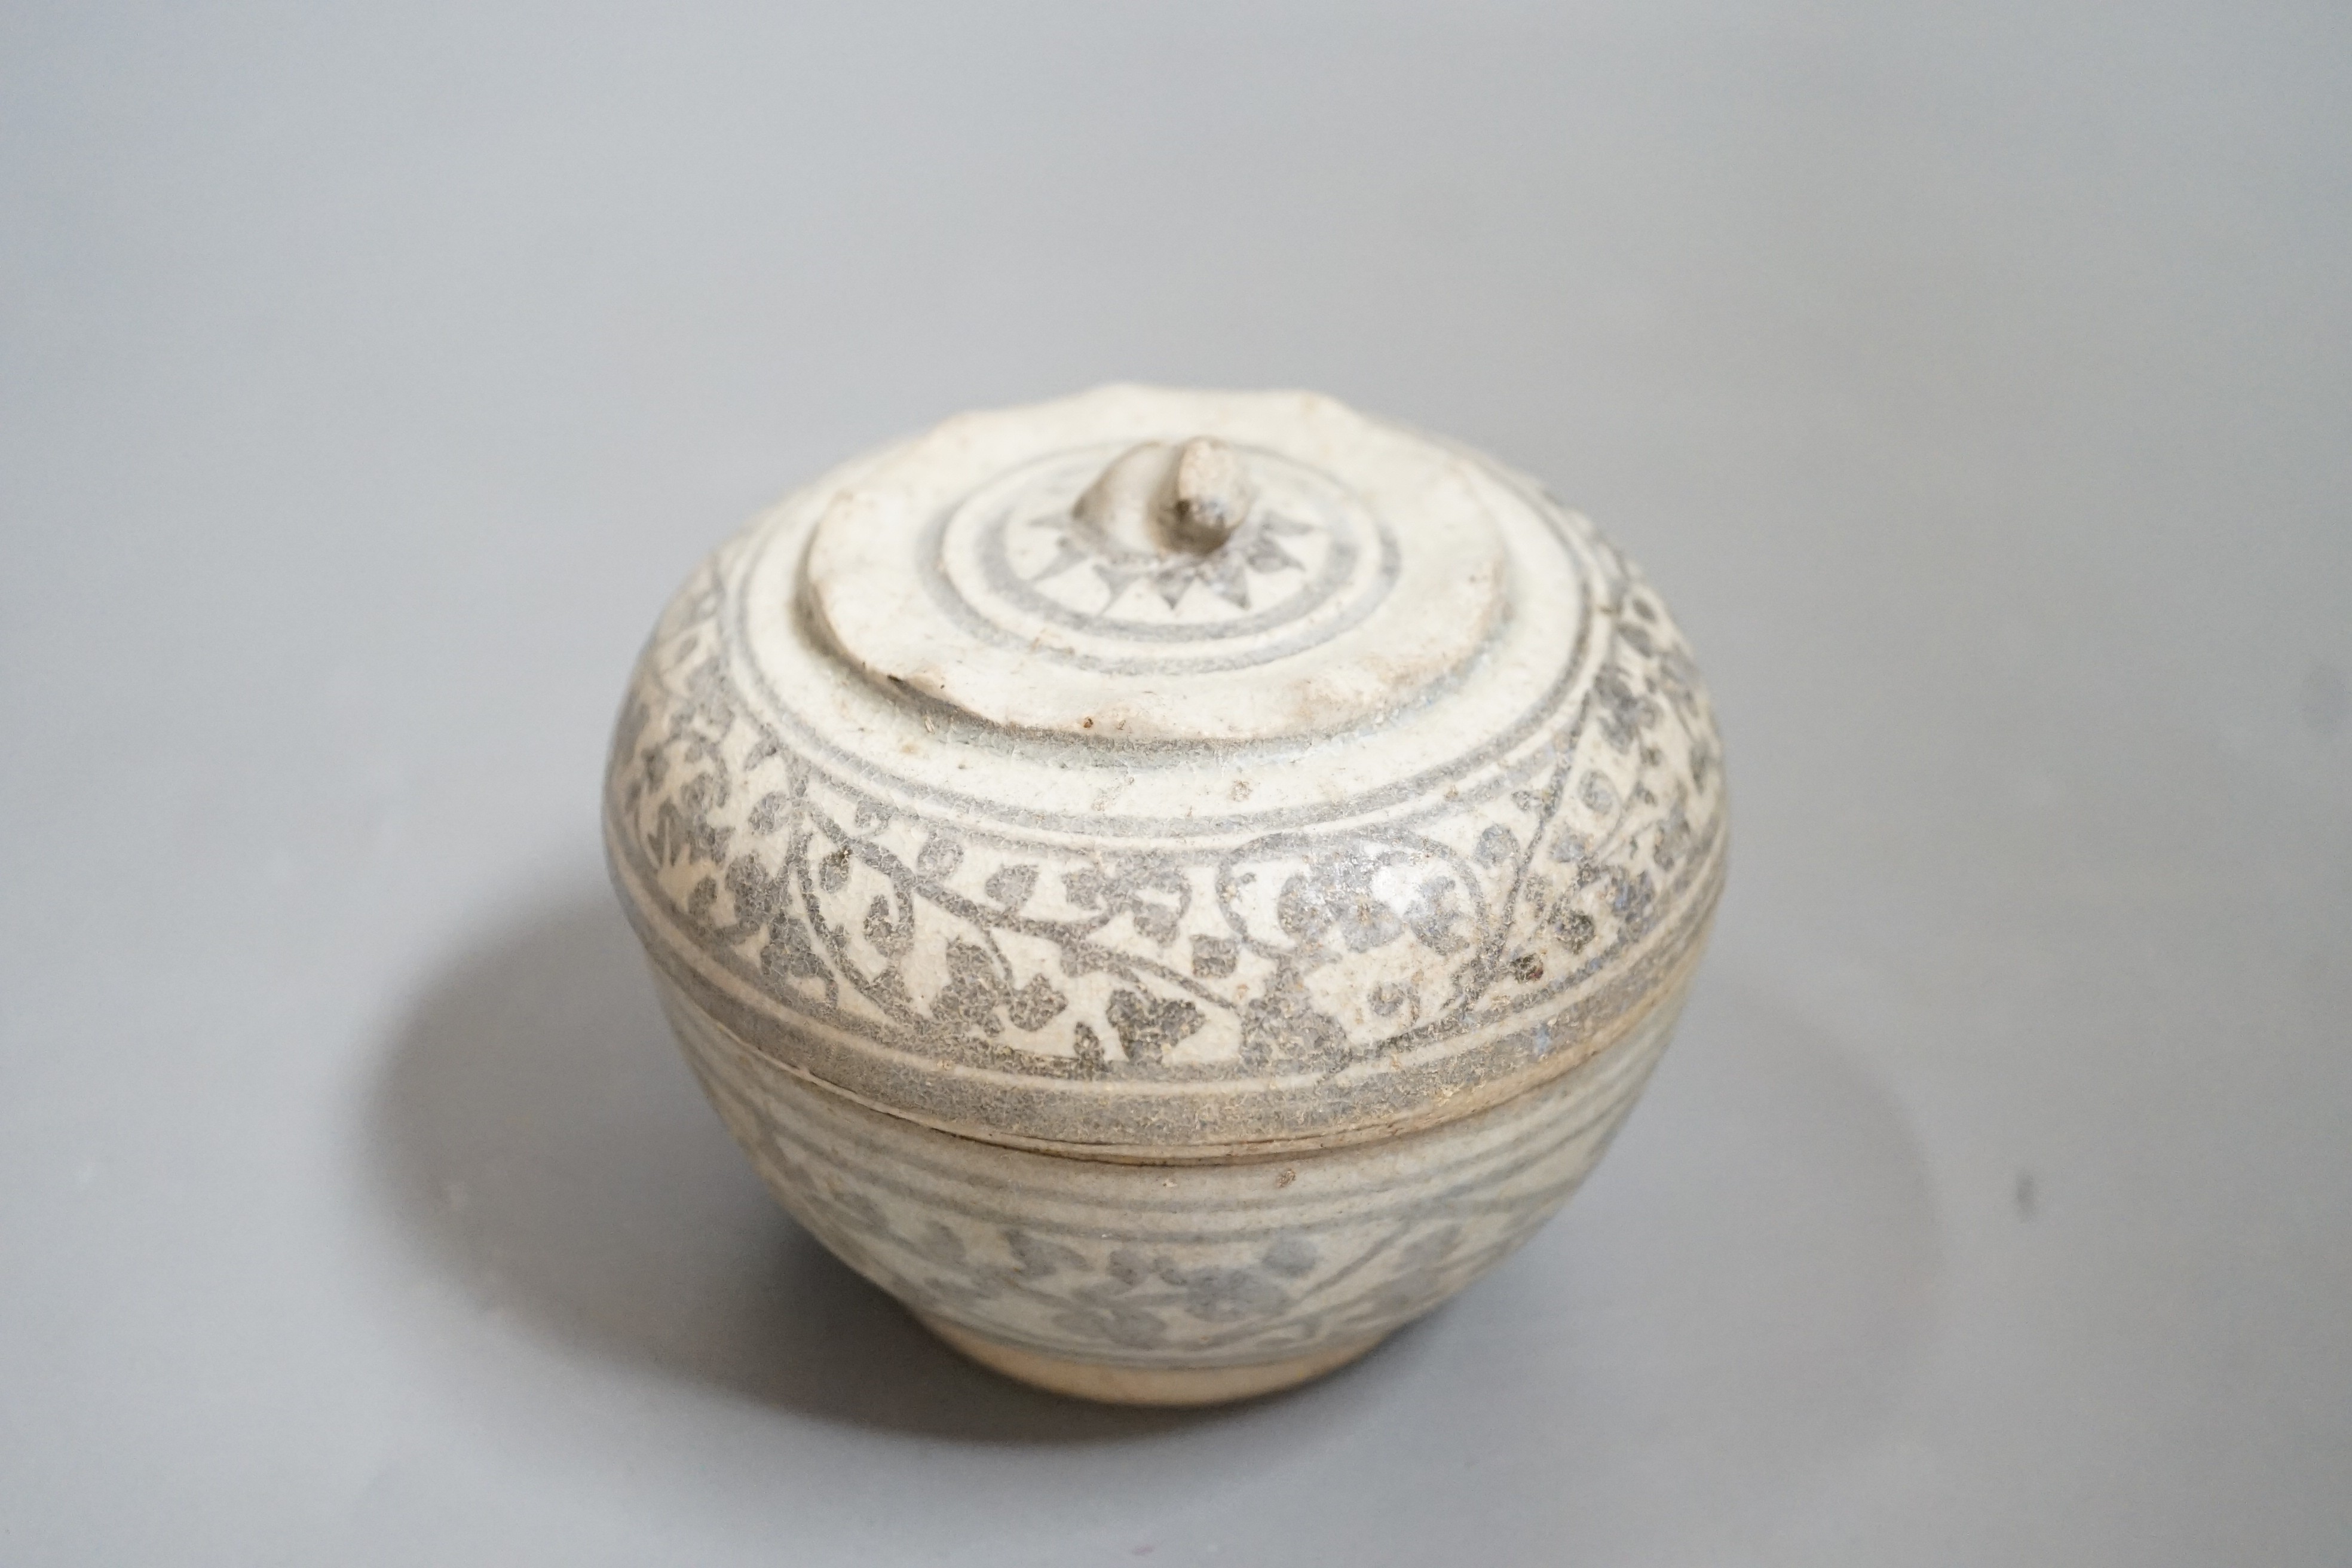 A Thai Sawankhalok blue and white box and cover, 14th-16th century, 9cm